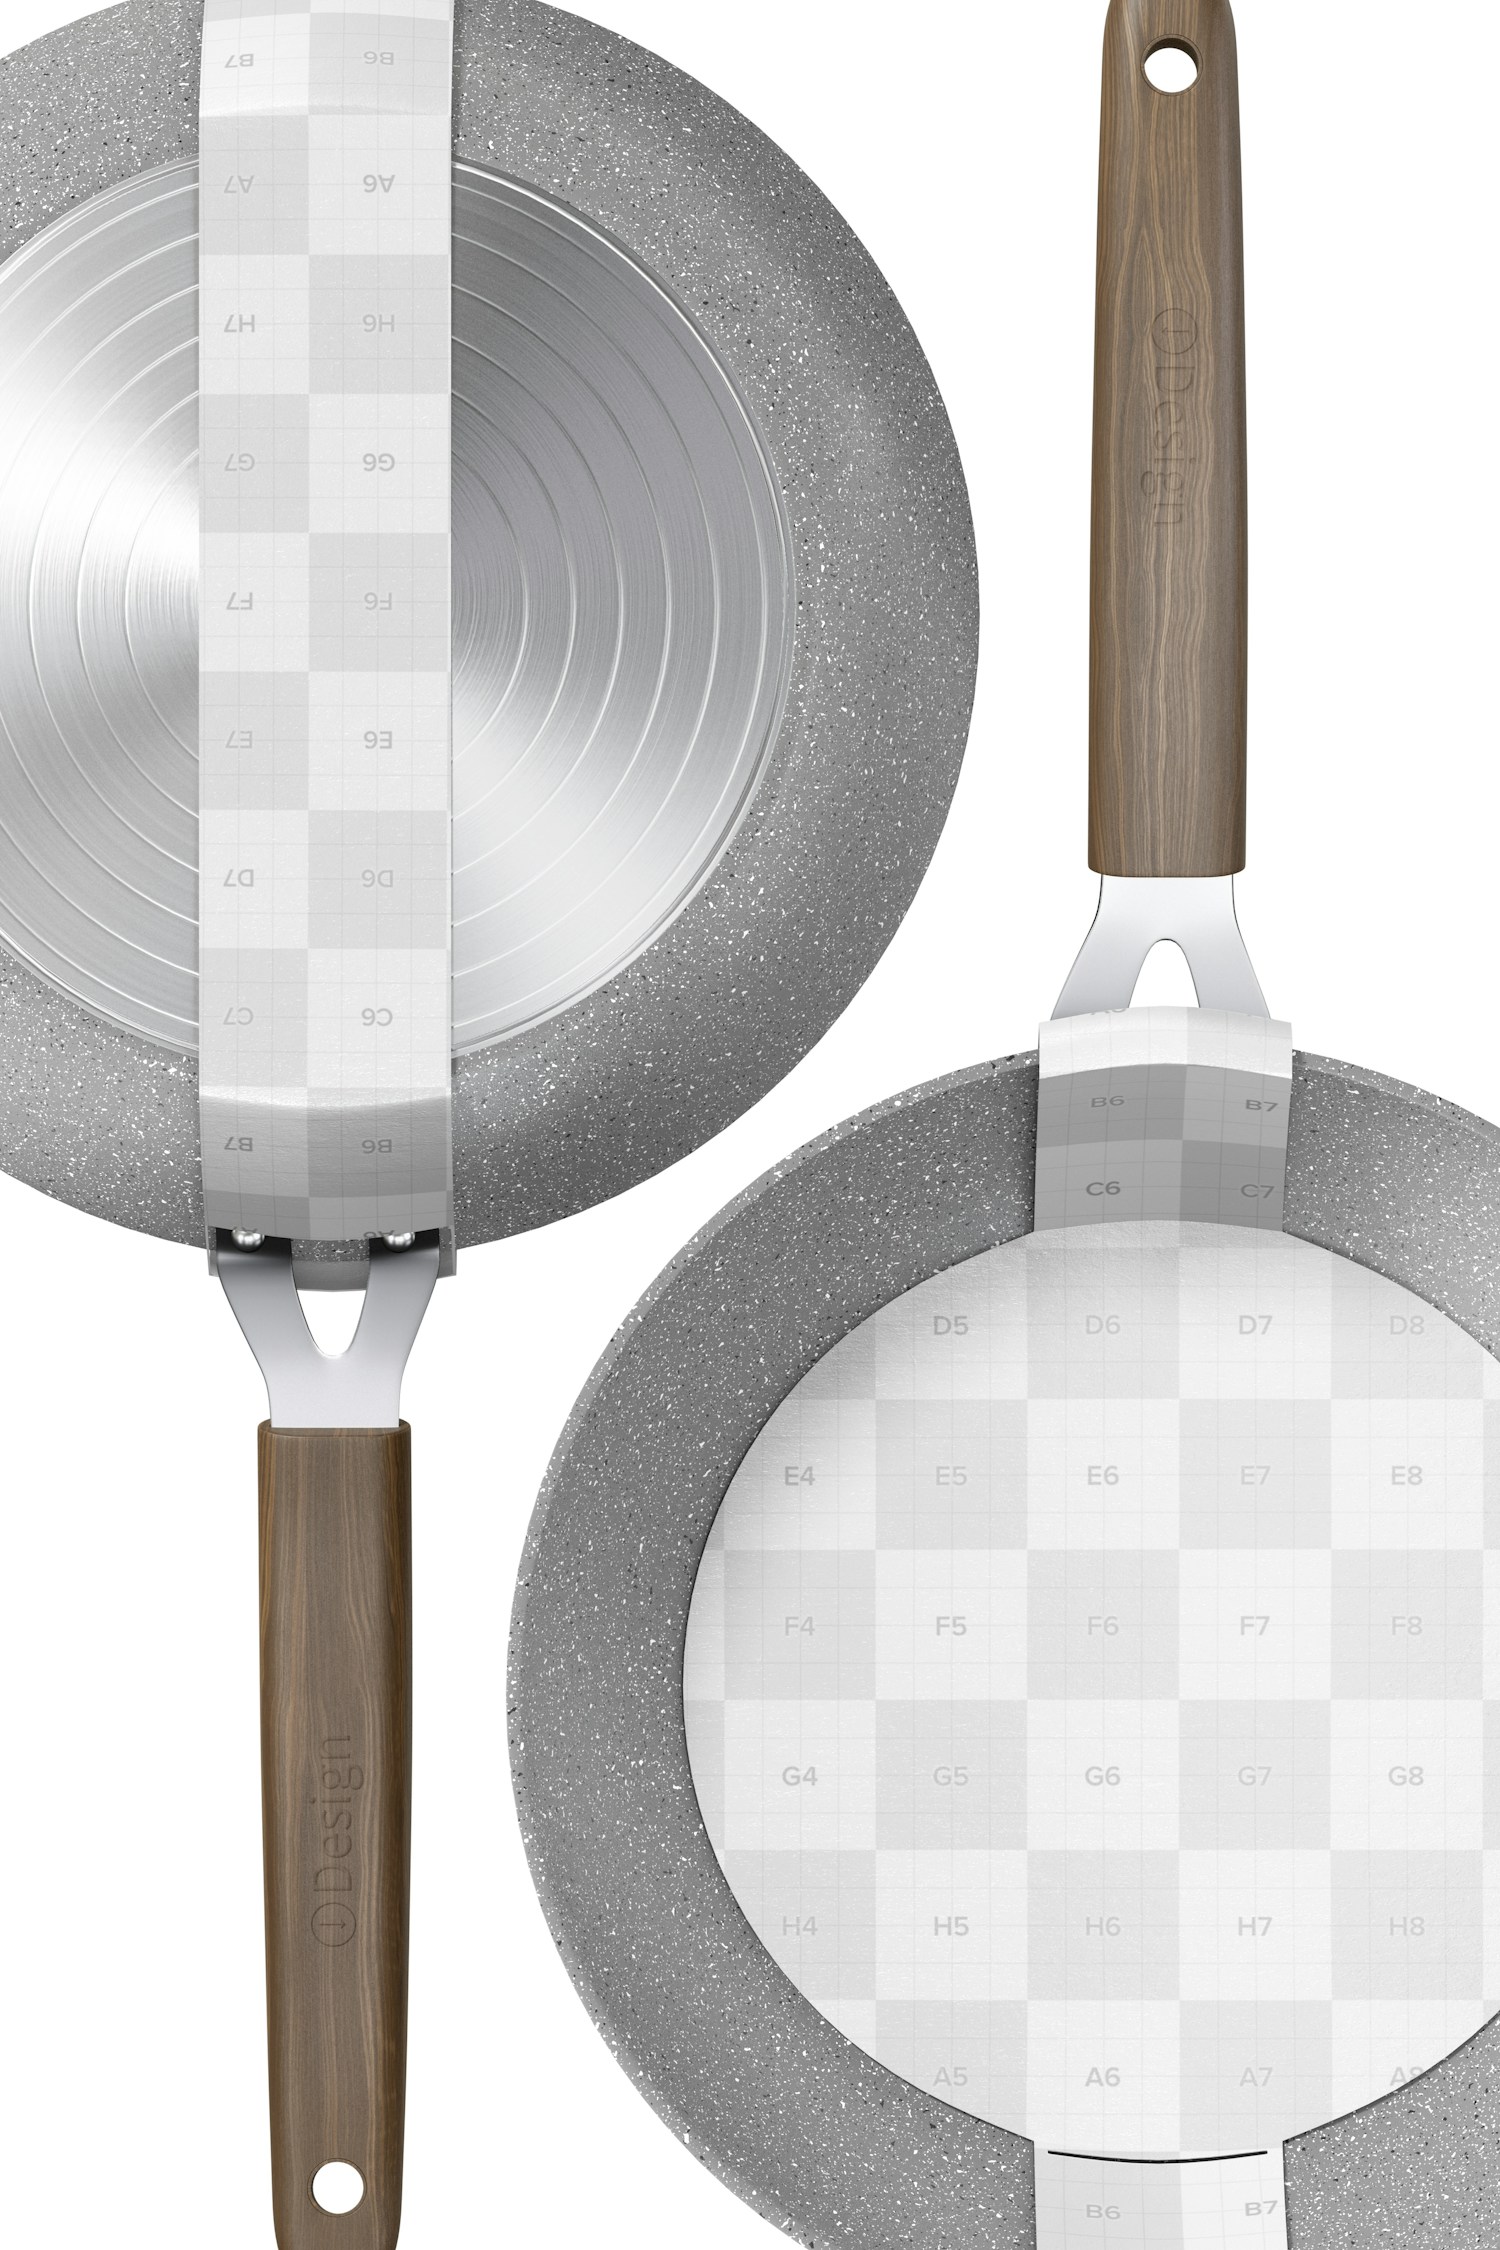 Skillet Pans Mockup, Front and Back View